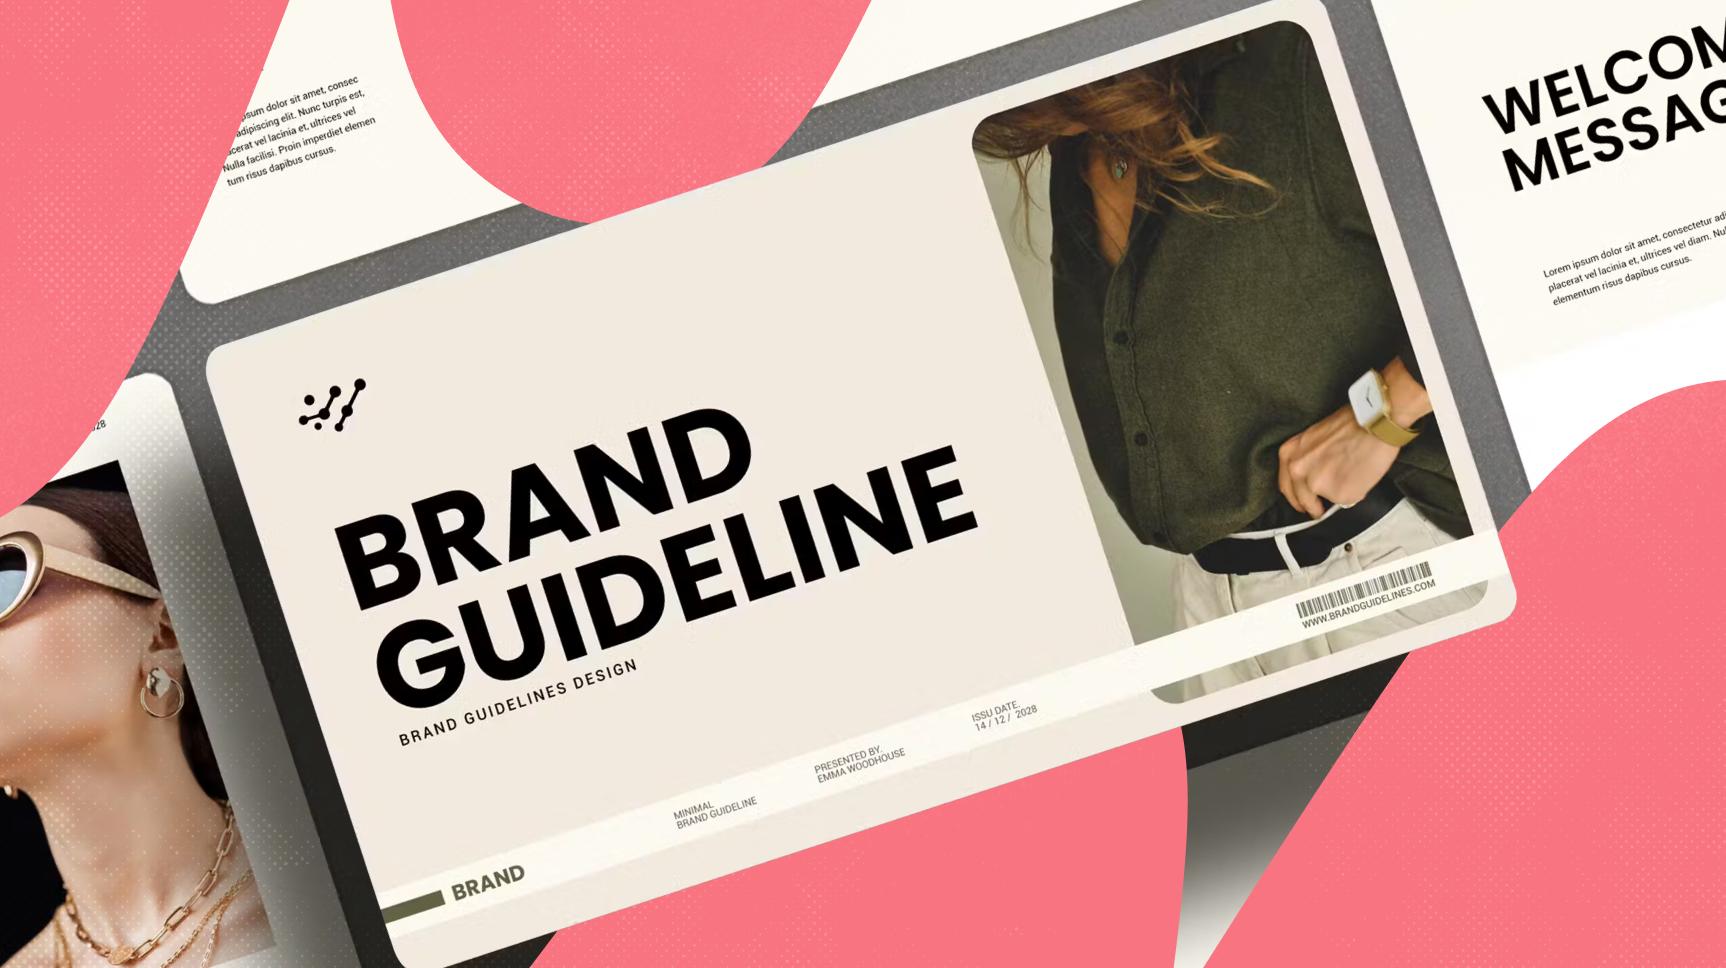 Brand guidelines